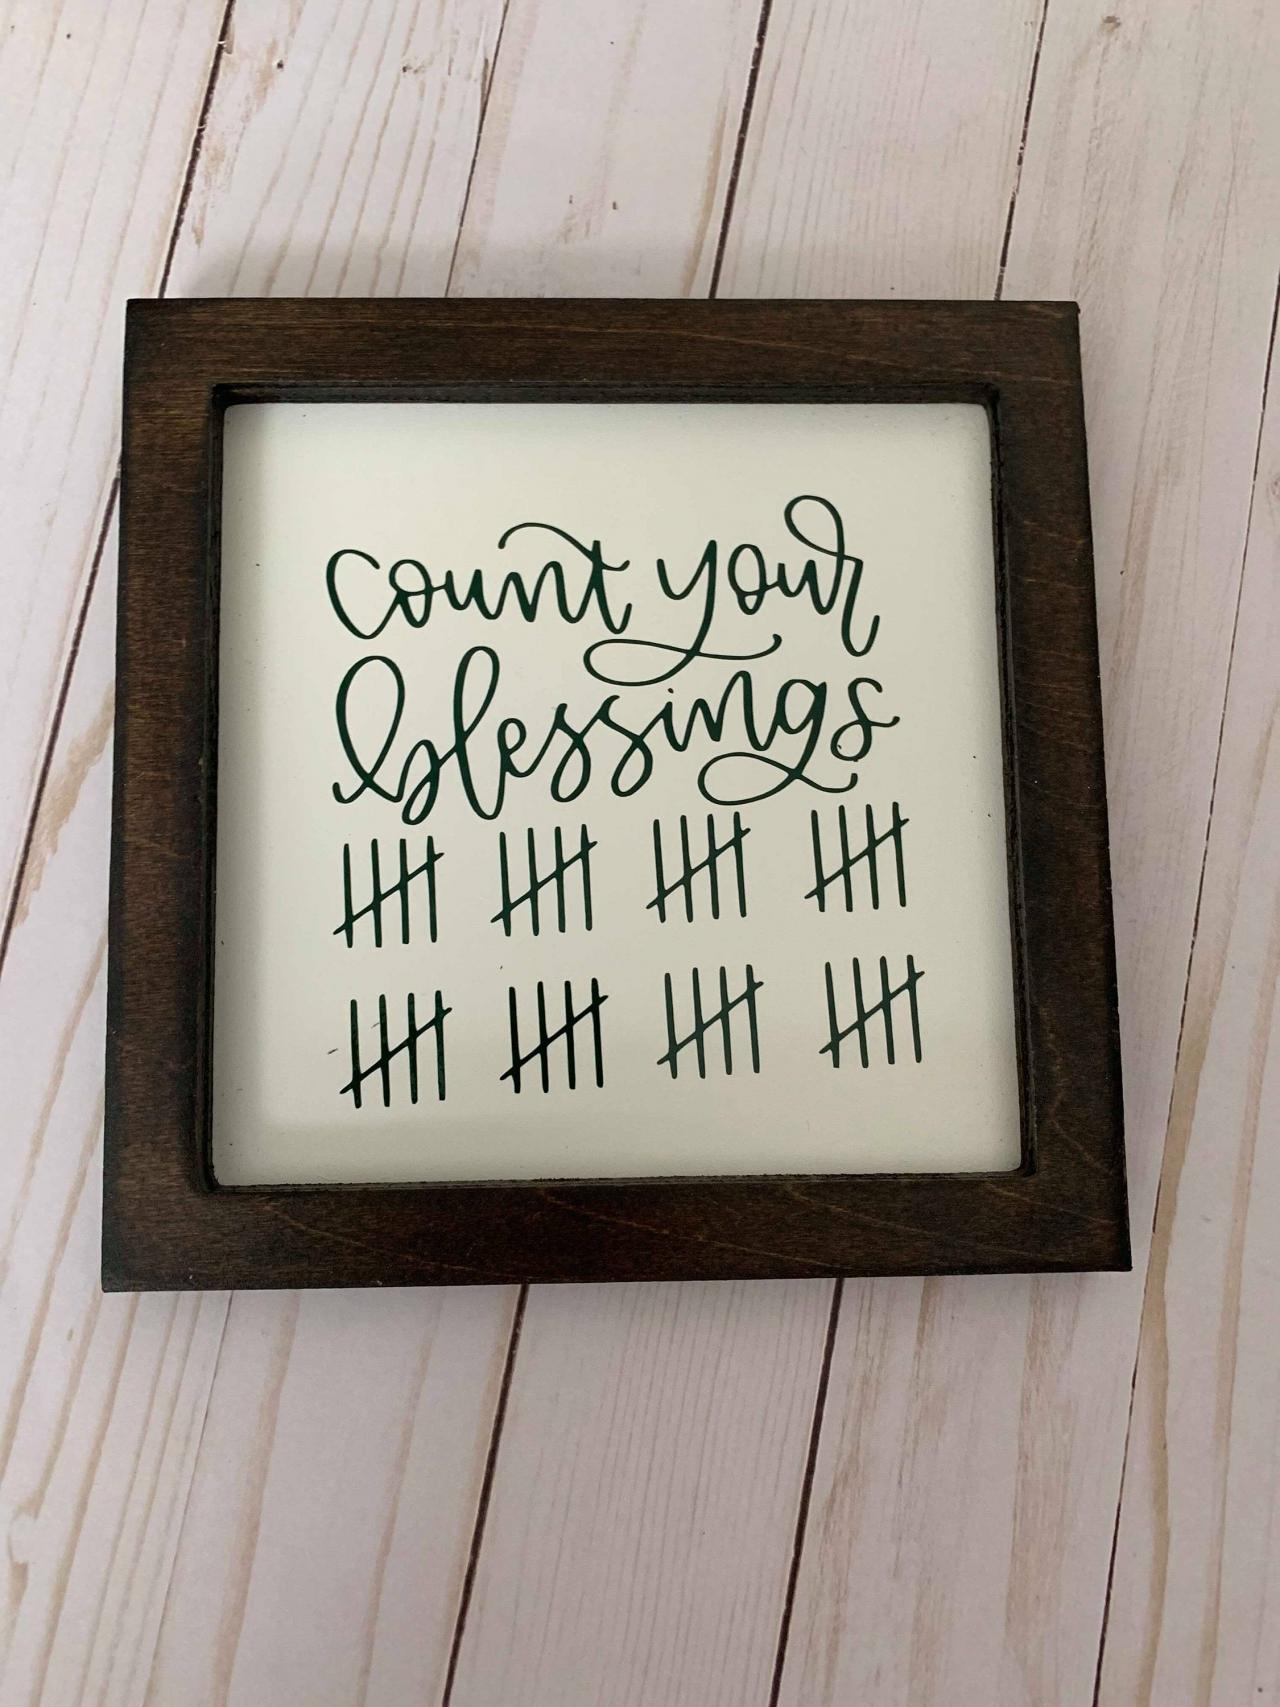 Count Your Blessings 8x8 Framed Sign, Farmhouse Blessings Sign, Farmhouse Decor, Blessings. Framed Wood.